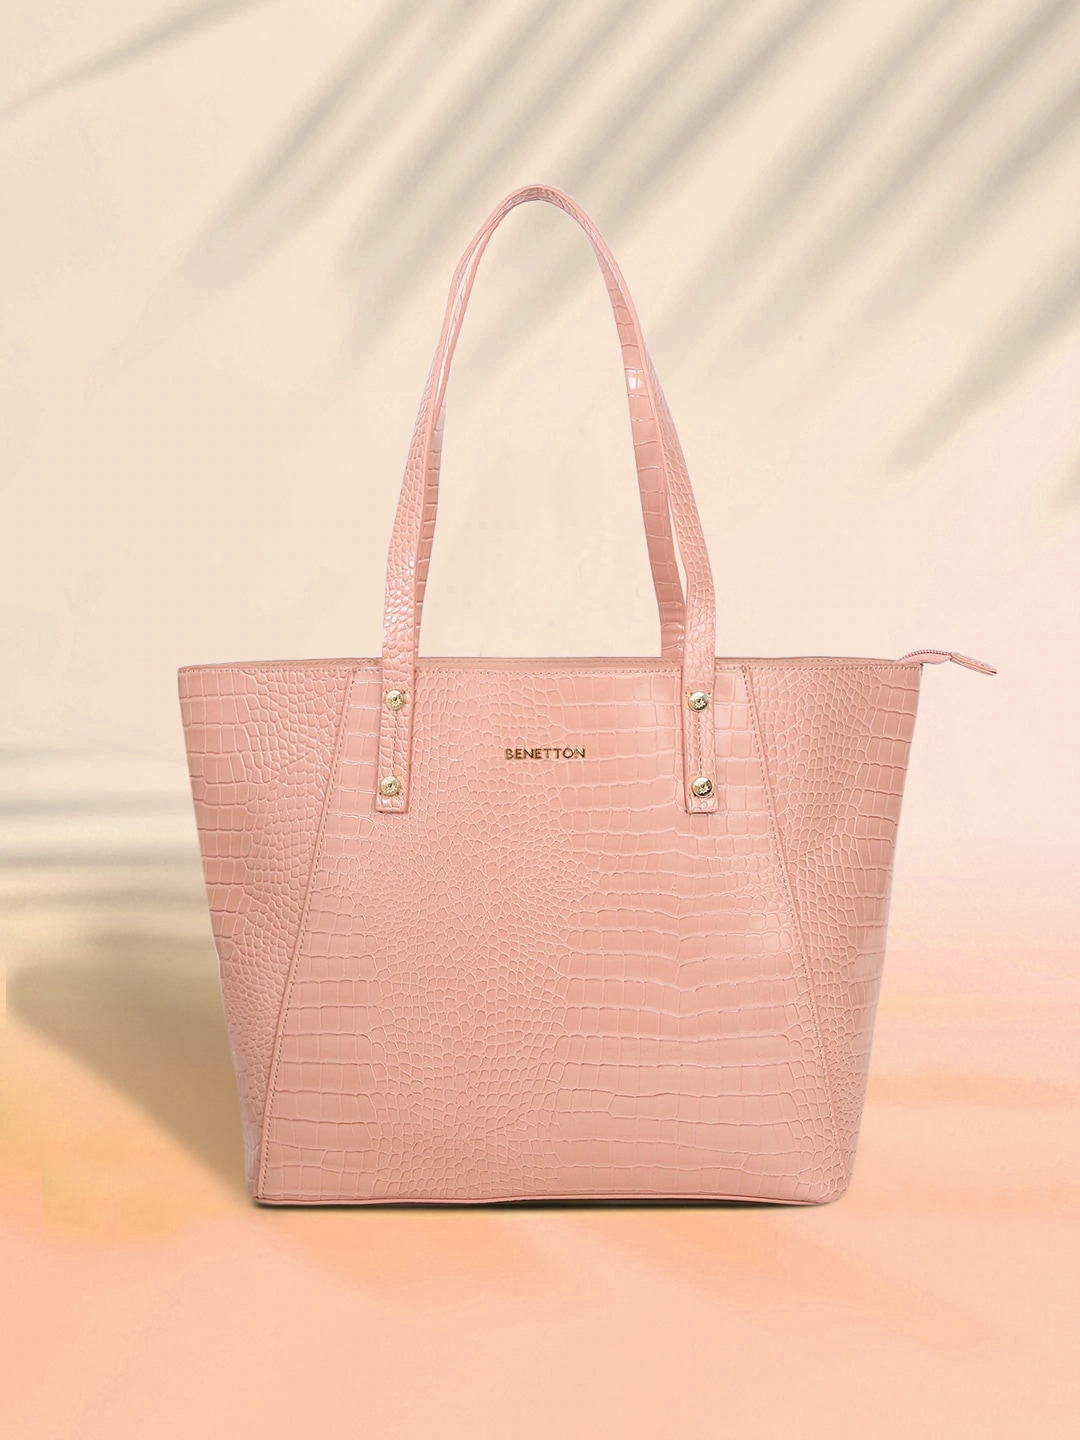 United Colors of Benetton Pink Animal Textured Shoulder Bag Price in India